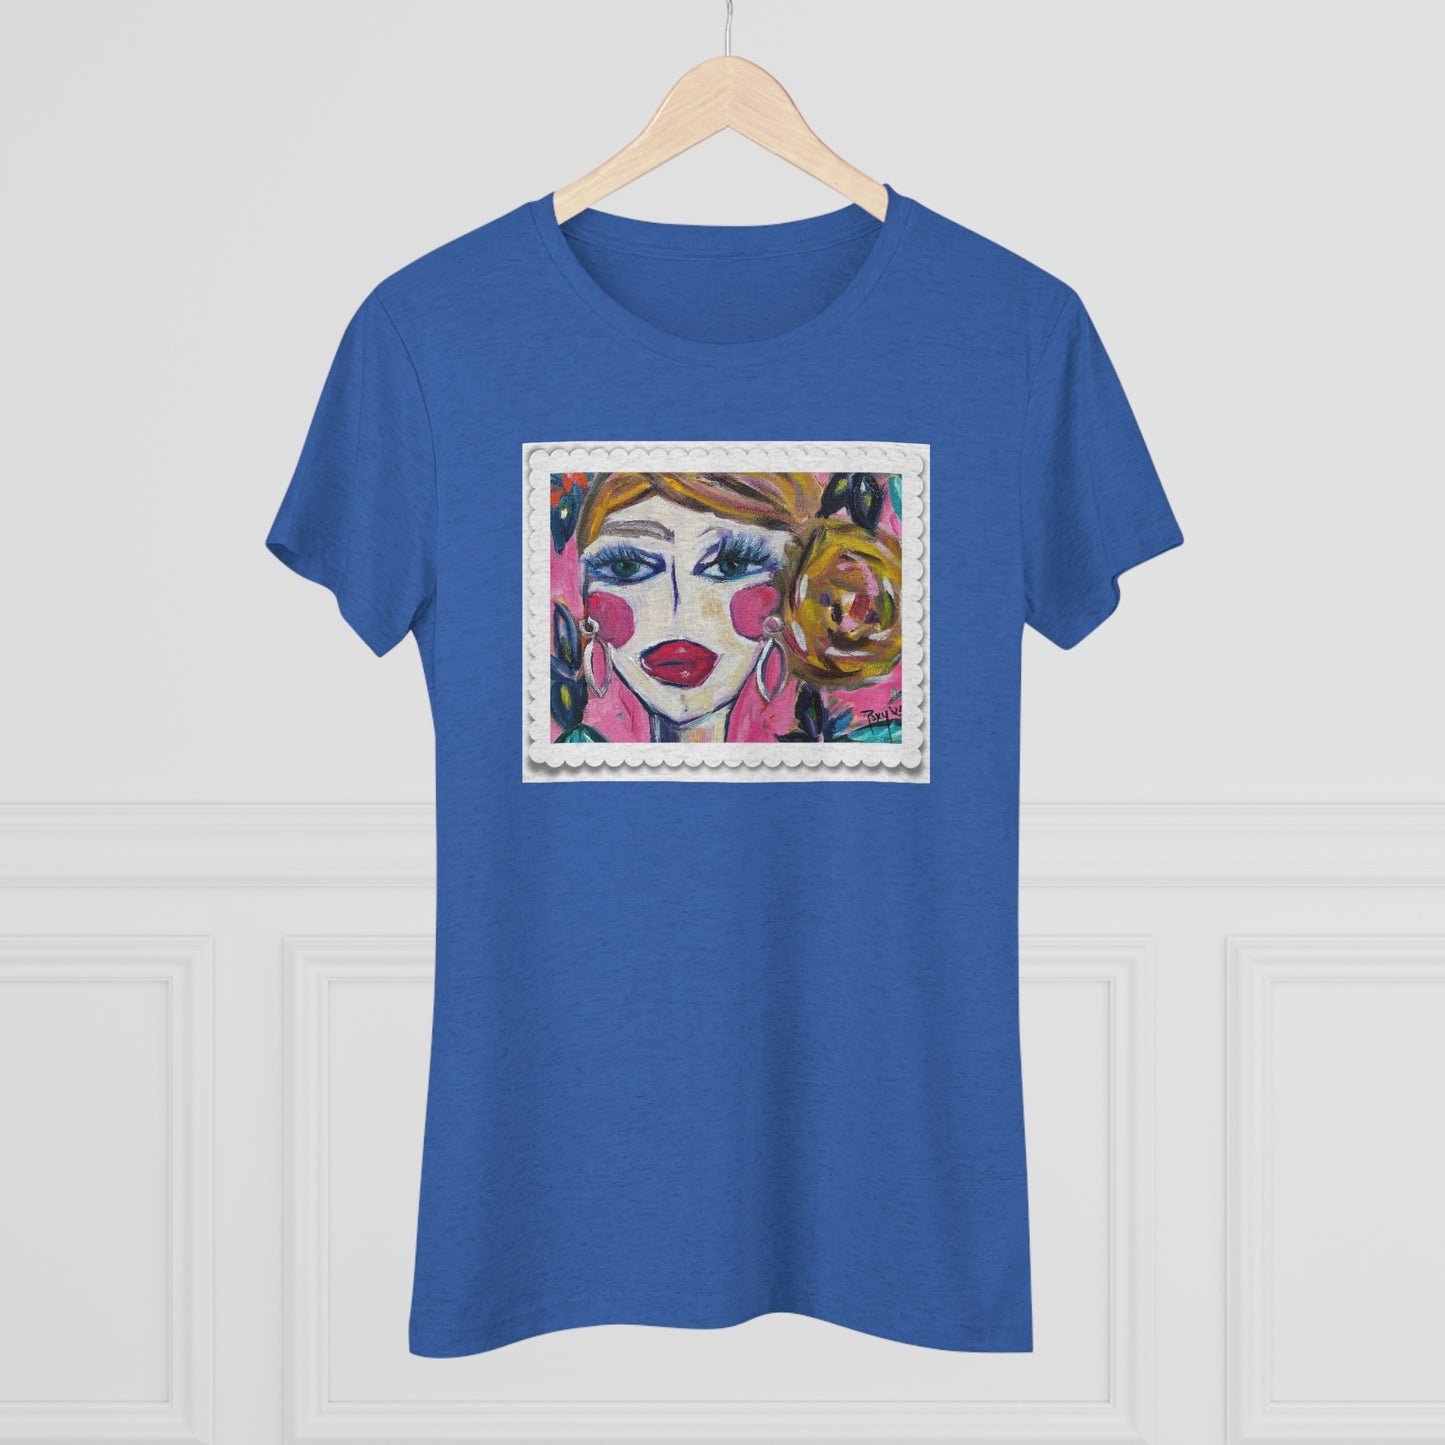 Lady with Irises Women's fitted Triblend Tee  tee shirt